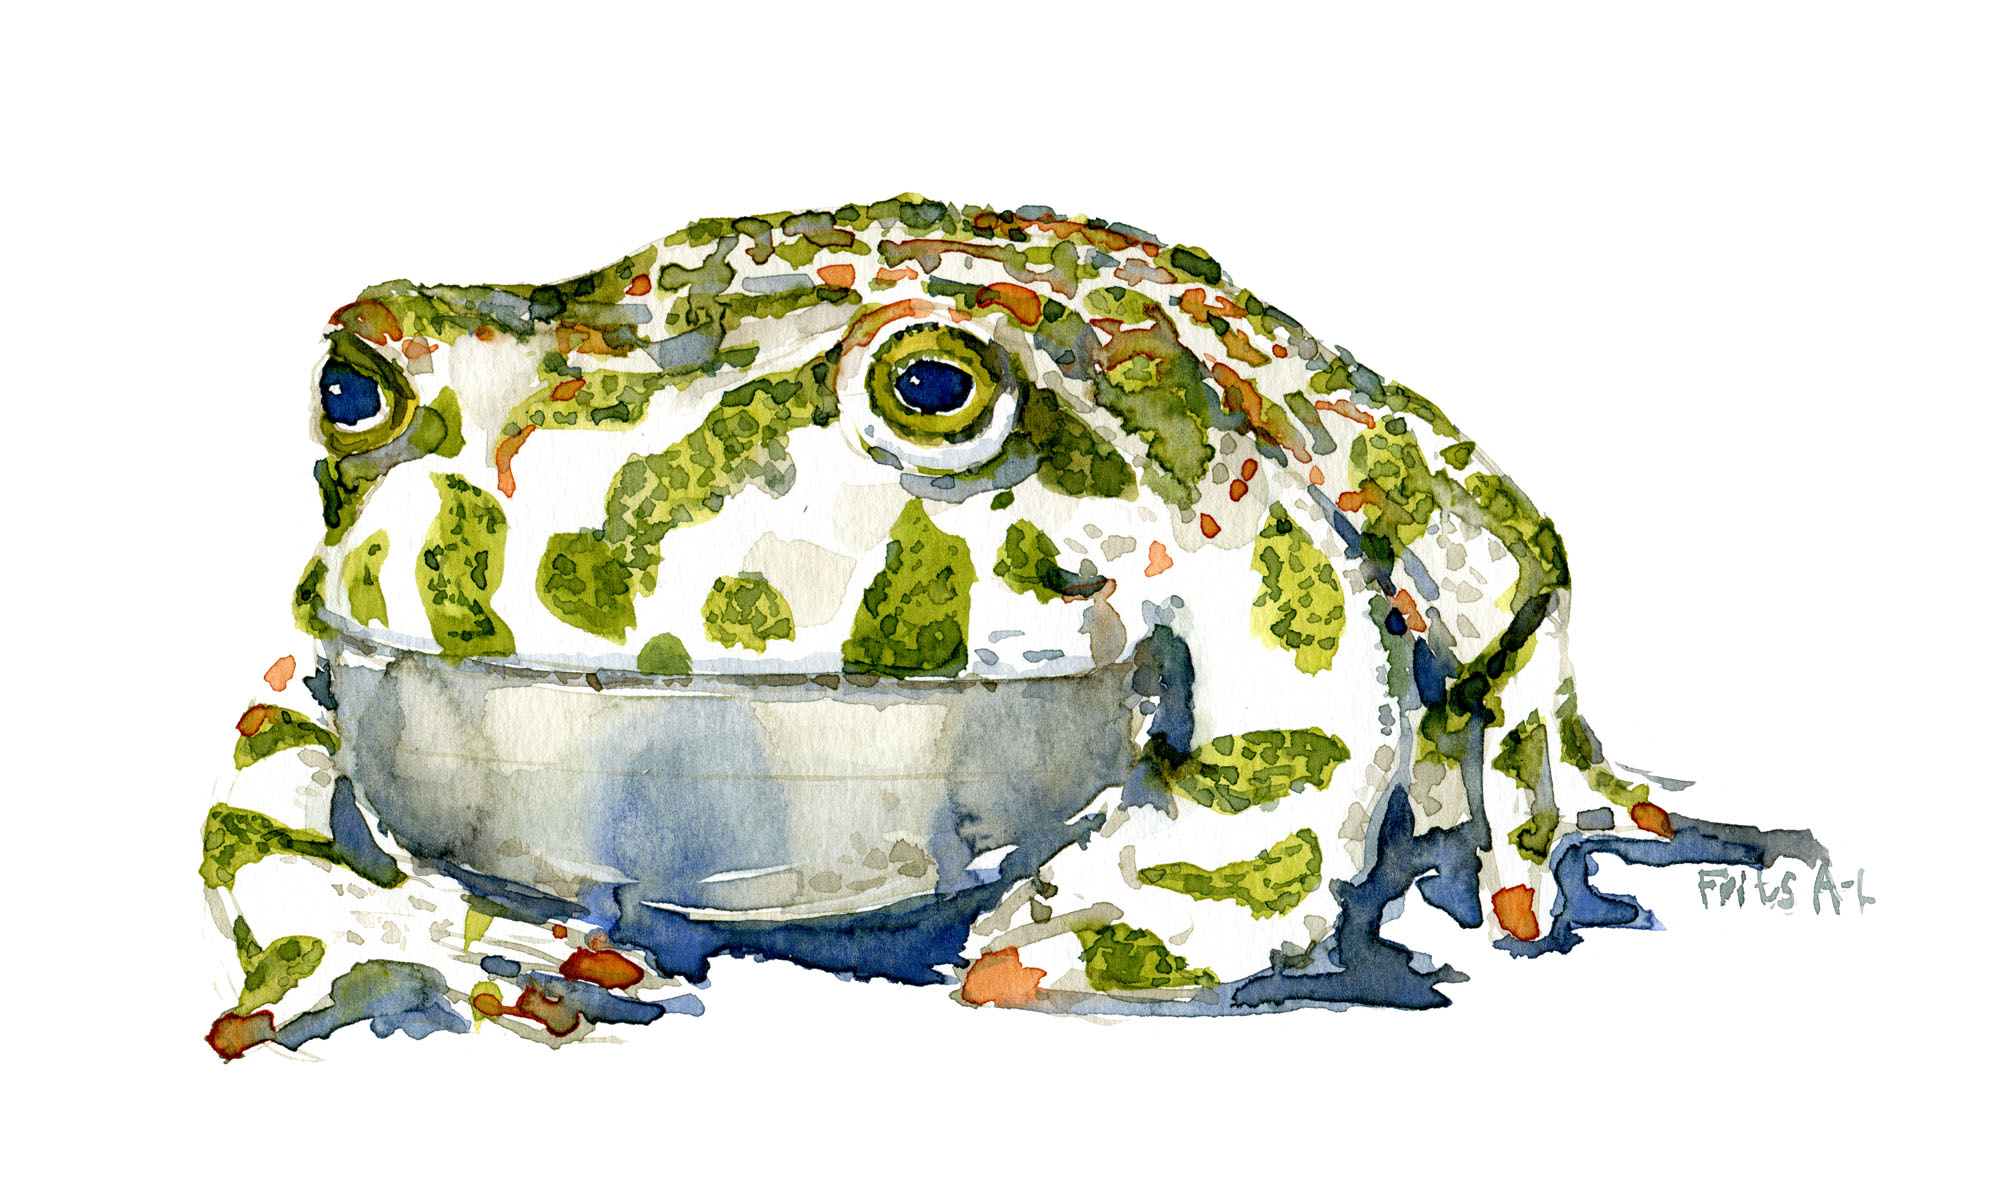 green-toad-front-illustration-by-frits-ahlefeldt